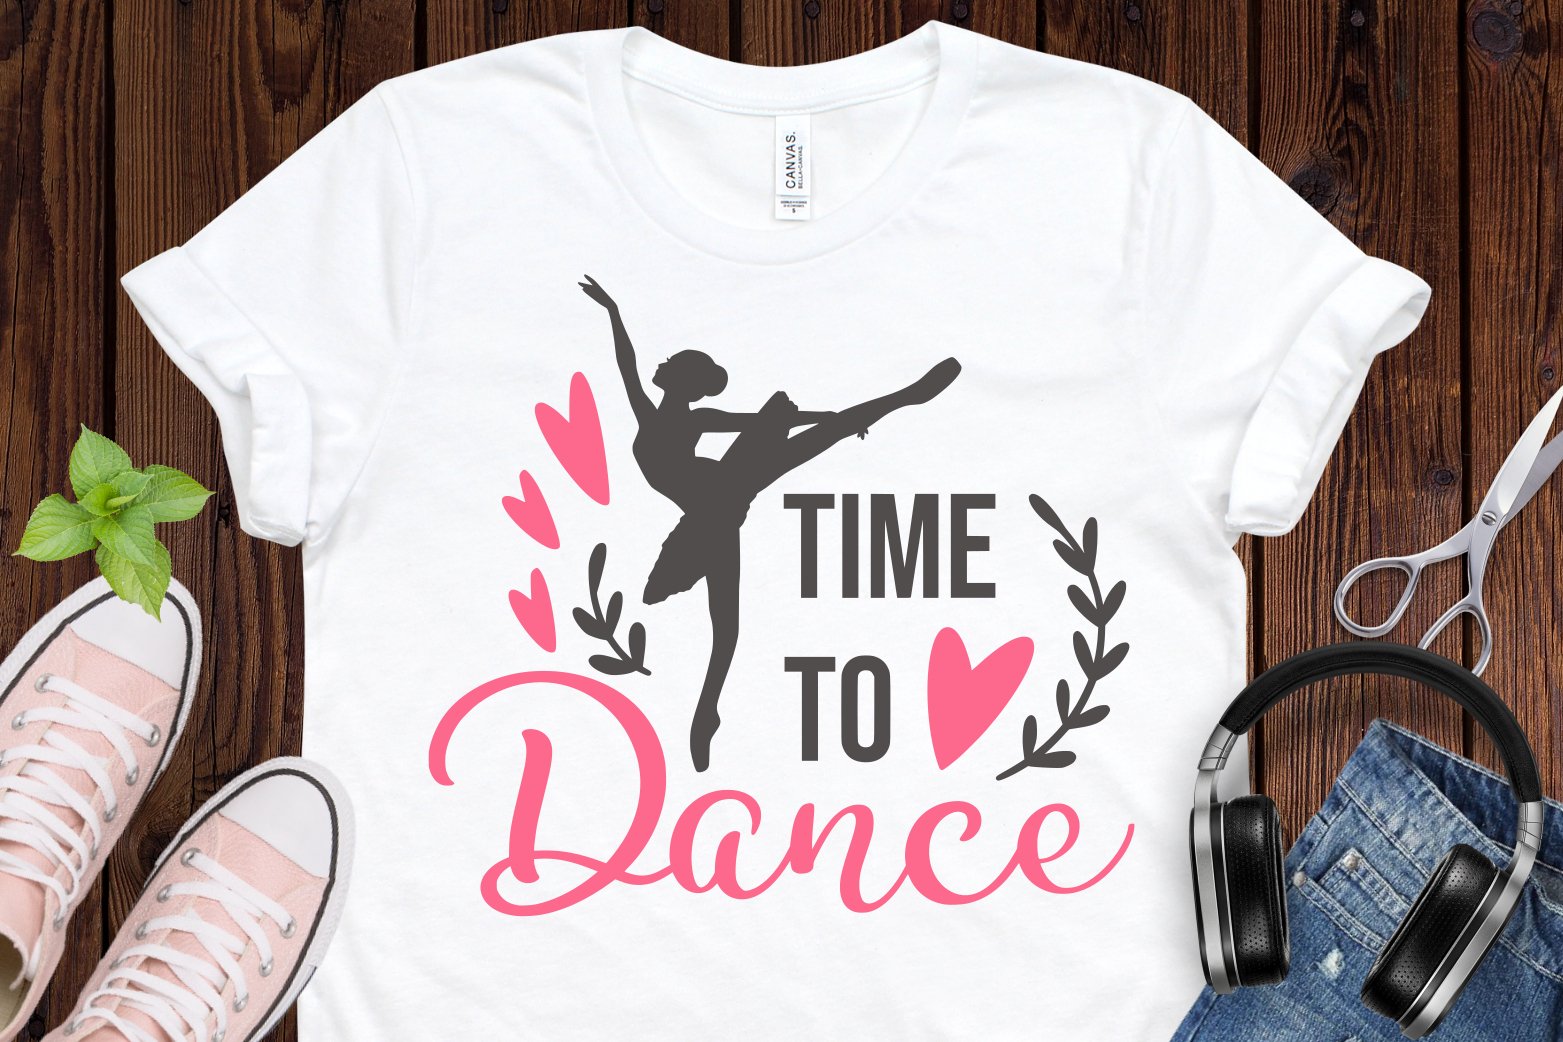 A great t-shirt with inscriptions for dancing.